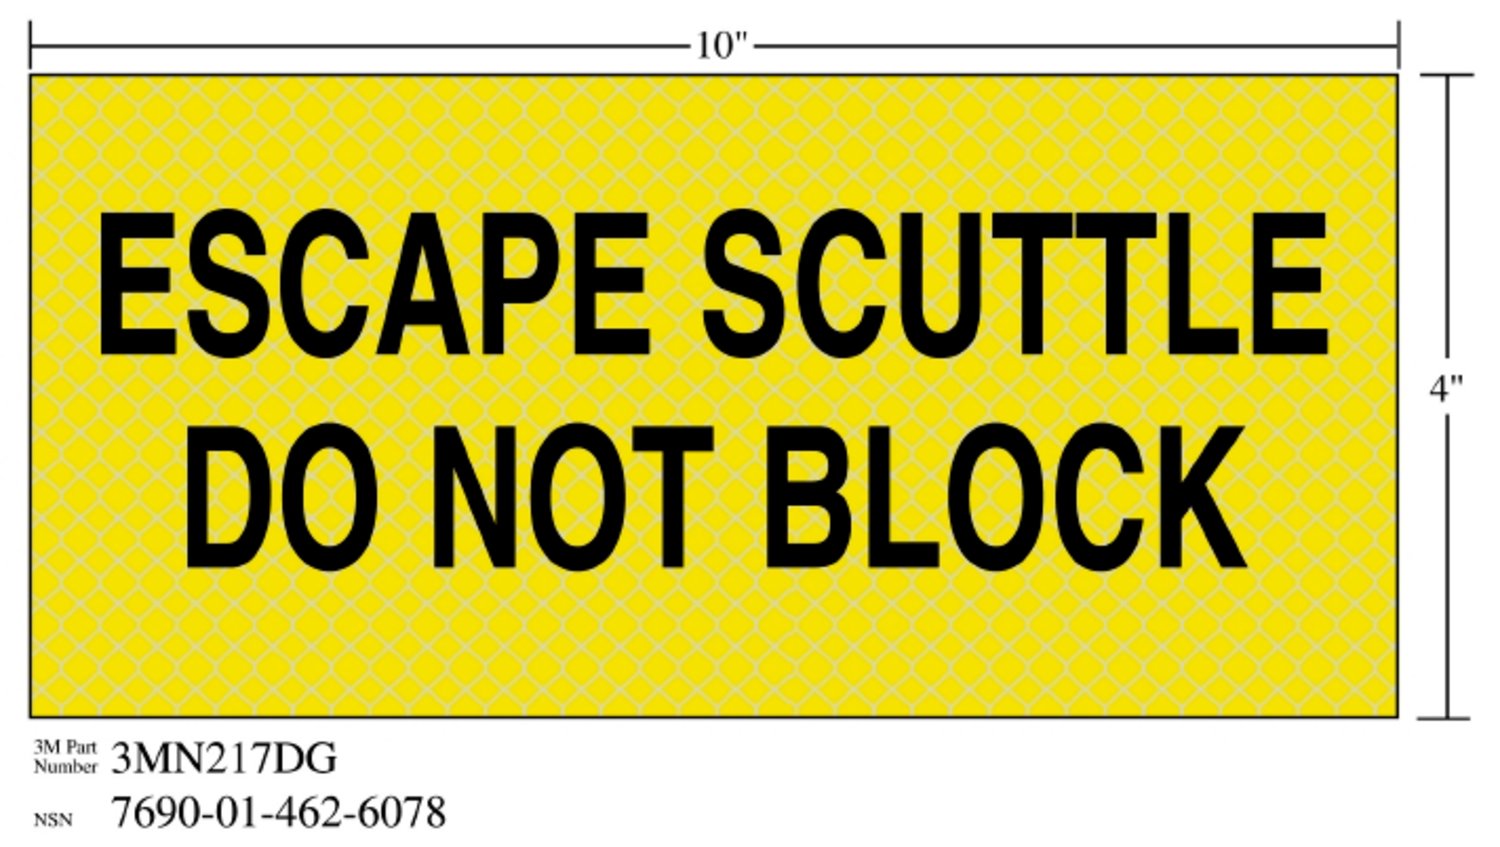 7010389833 - 3M Diamond Grade Safety Sign 3MN217DG, "ESCAPE…BLOCK", 10 in x 4 in,
10/Package